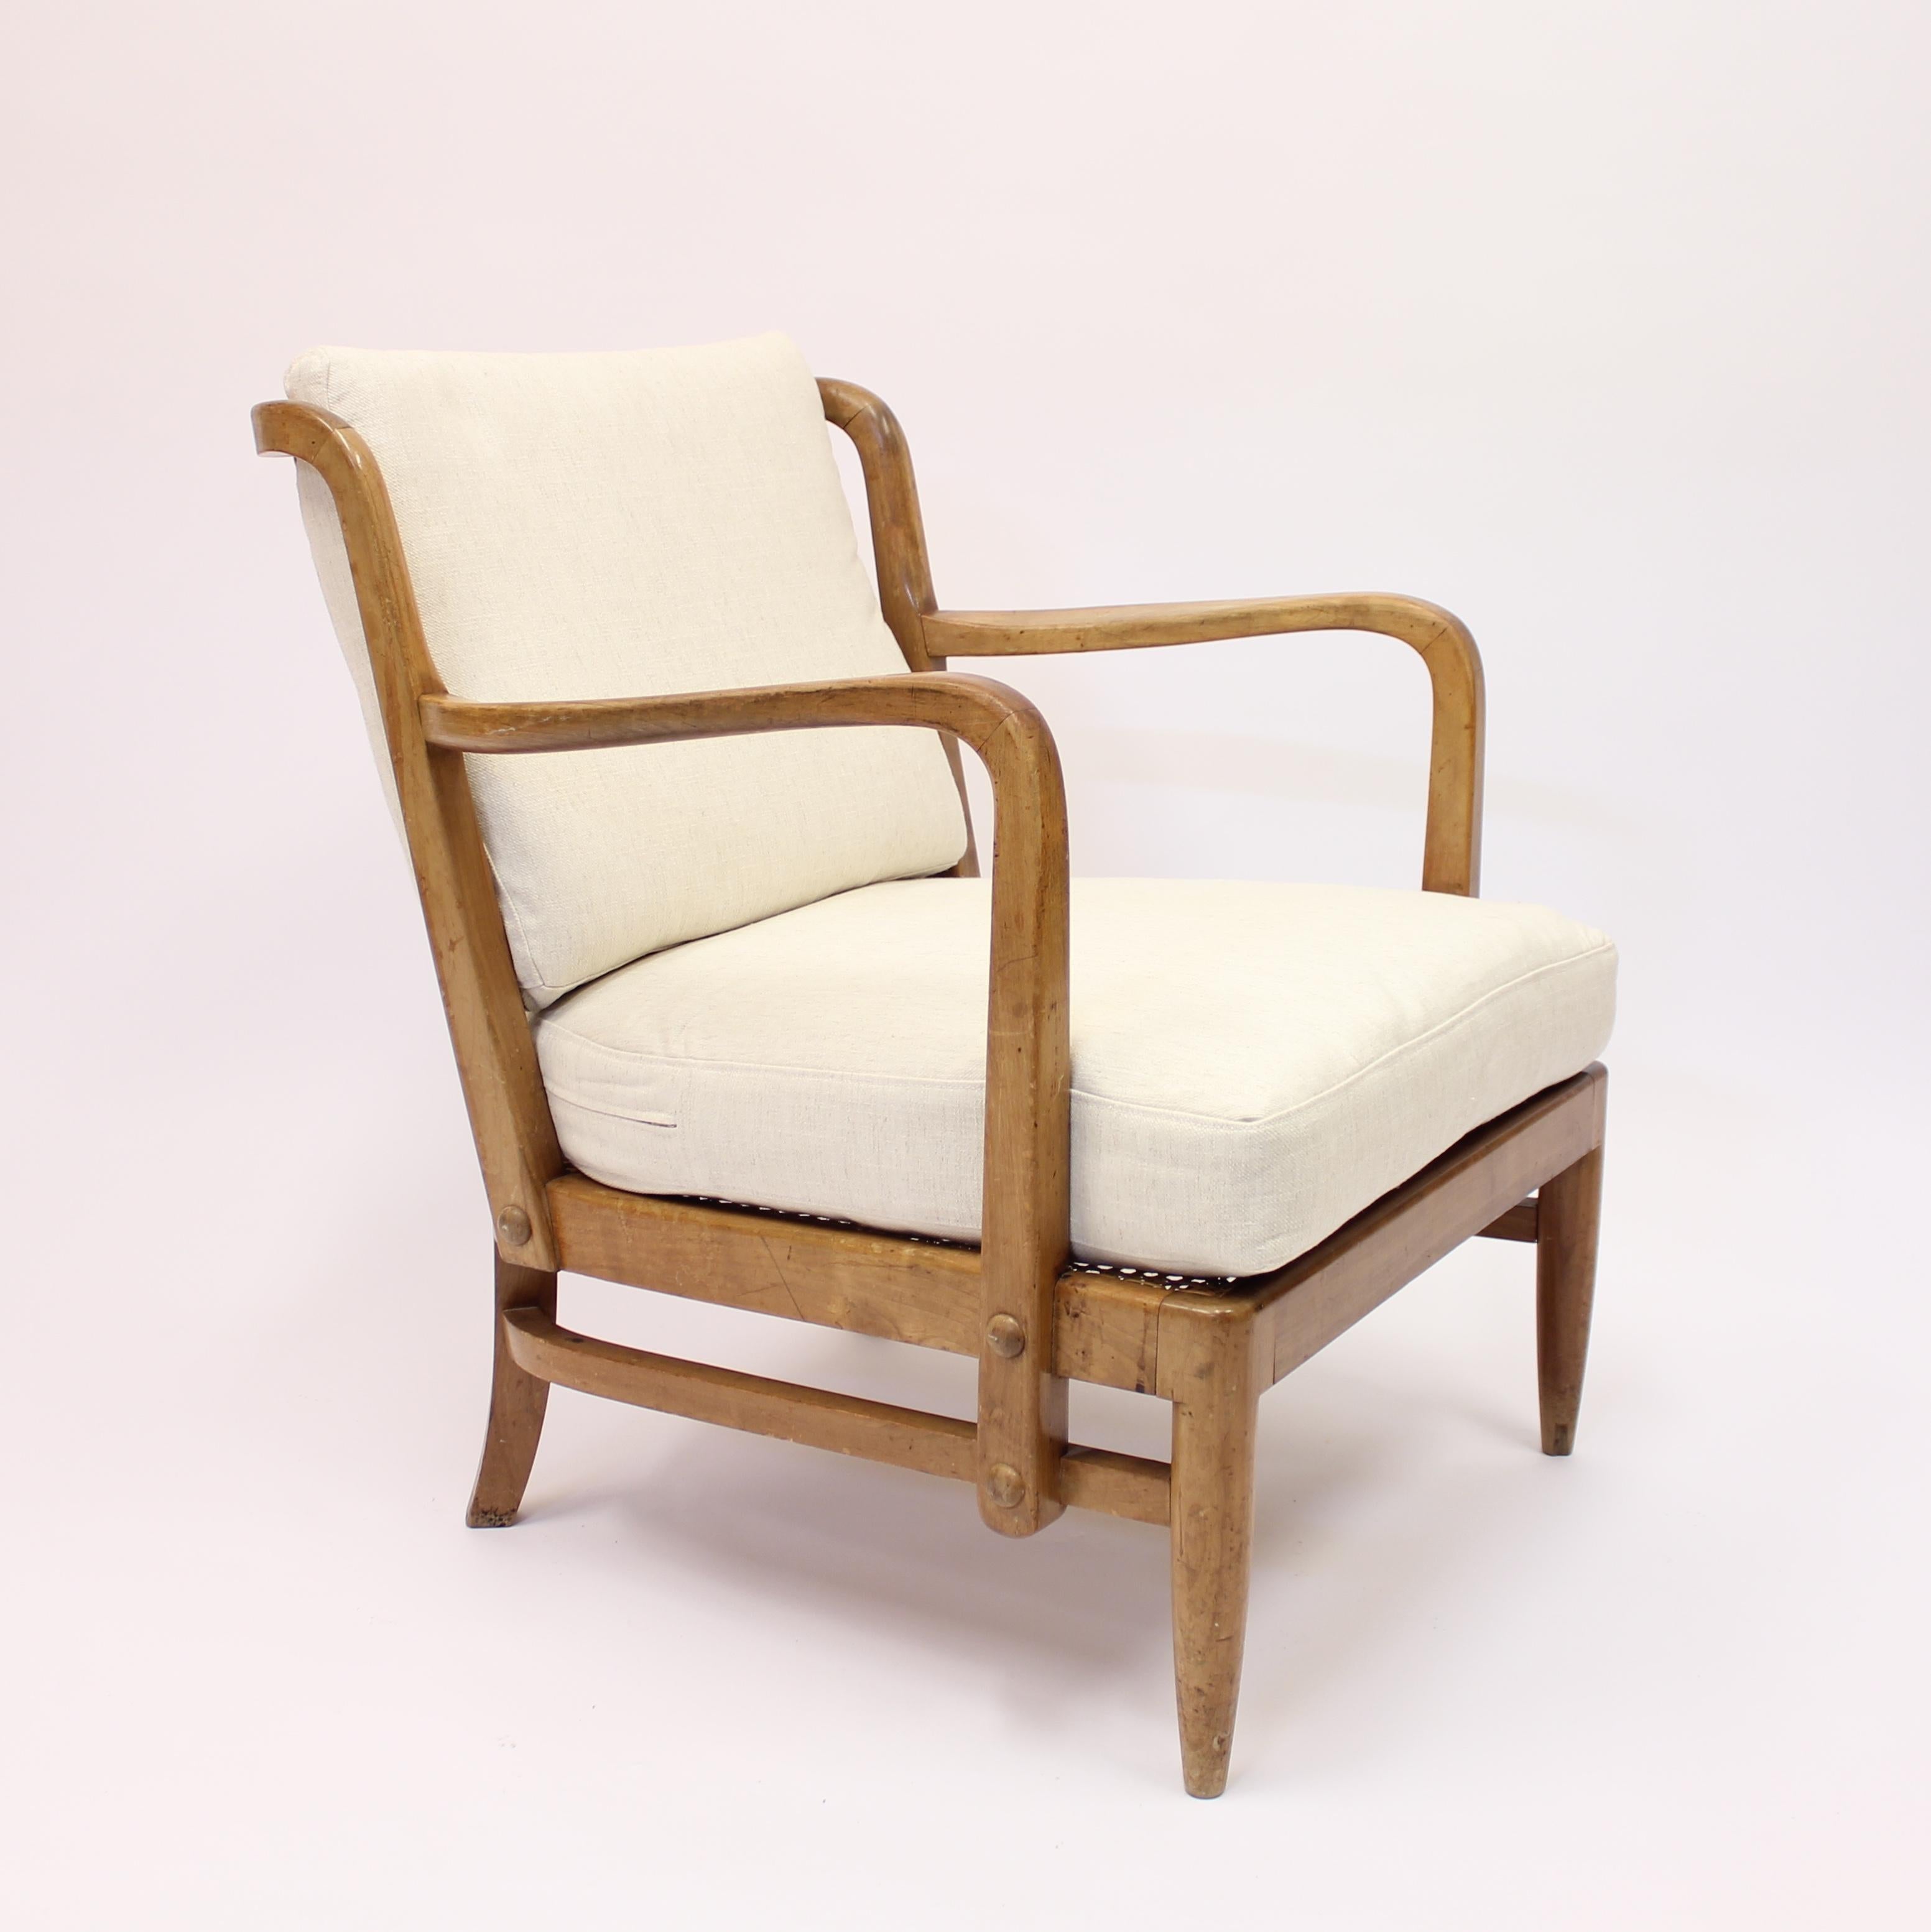 Very rare loung chair from ca 1940 in birch (or maybe elm) with new off-white fabric to both cushions. The pegs / stems at the backrest are made of bambu and the seat cushion is held up with a rattan bottom. It's attributed to Swedish / German